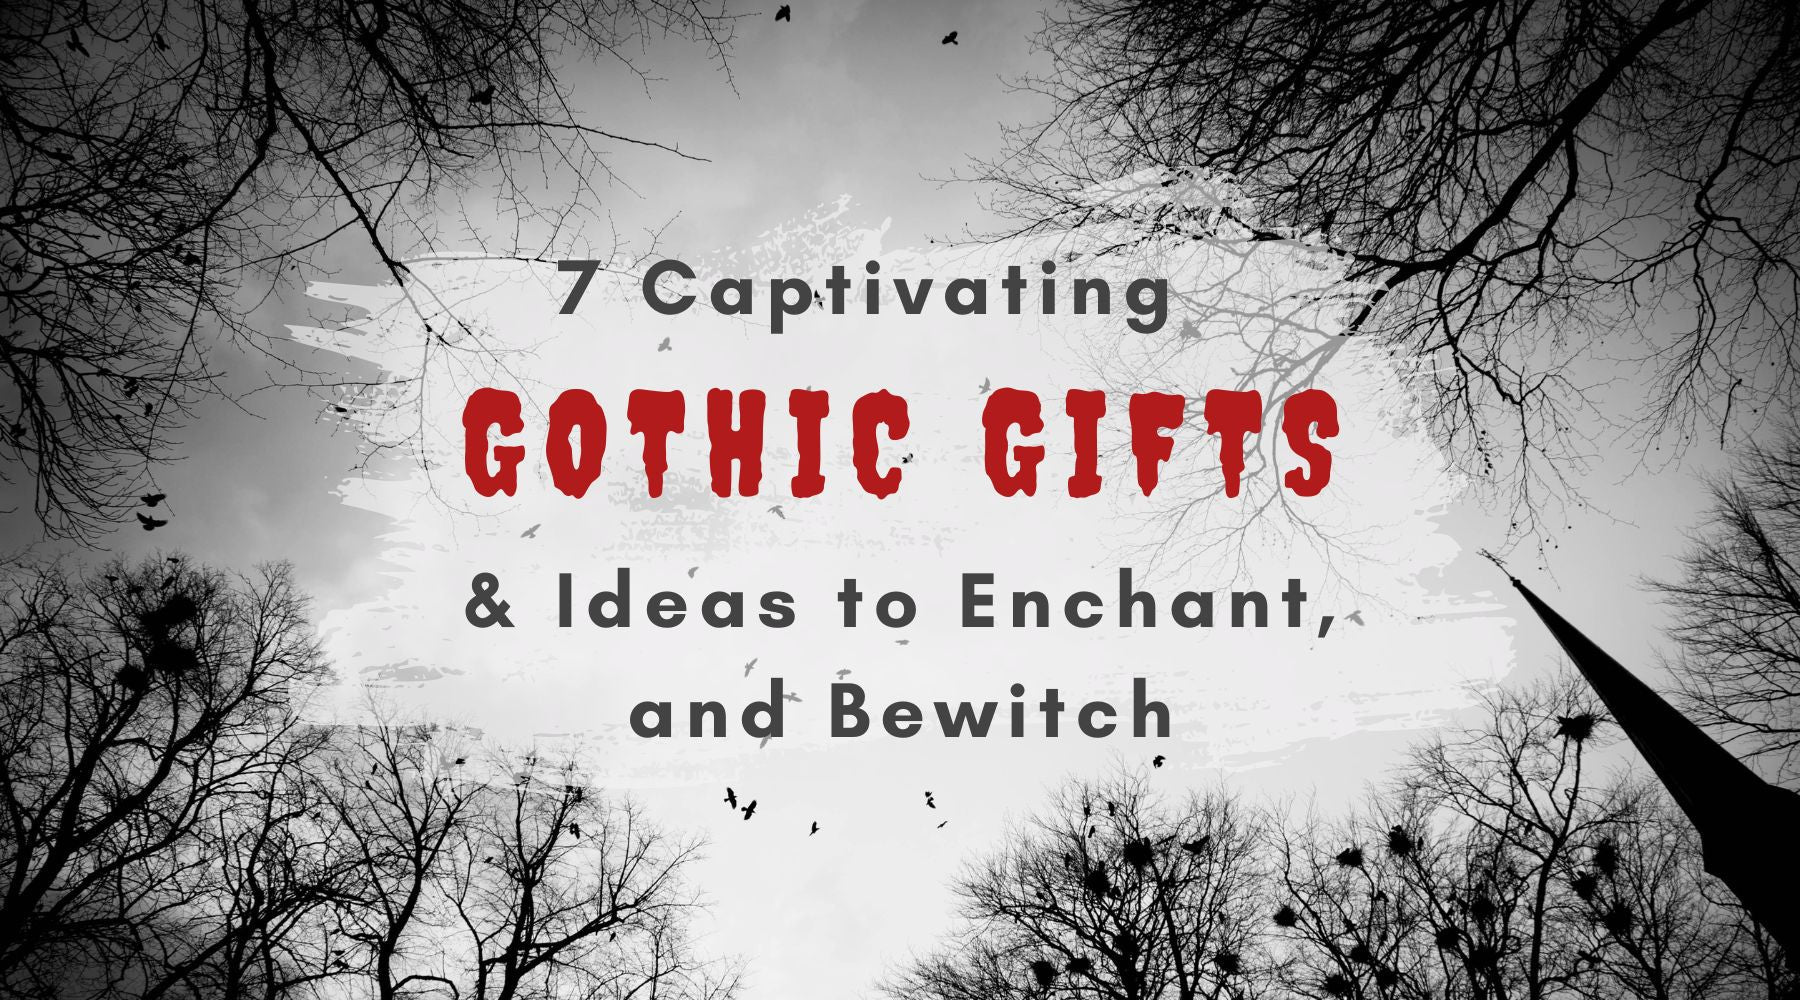 7 Captivating Gothic Gifts and Ideas to Enchant, and Bewitch - Bookshelf Memories